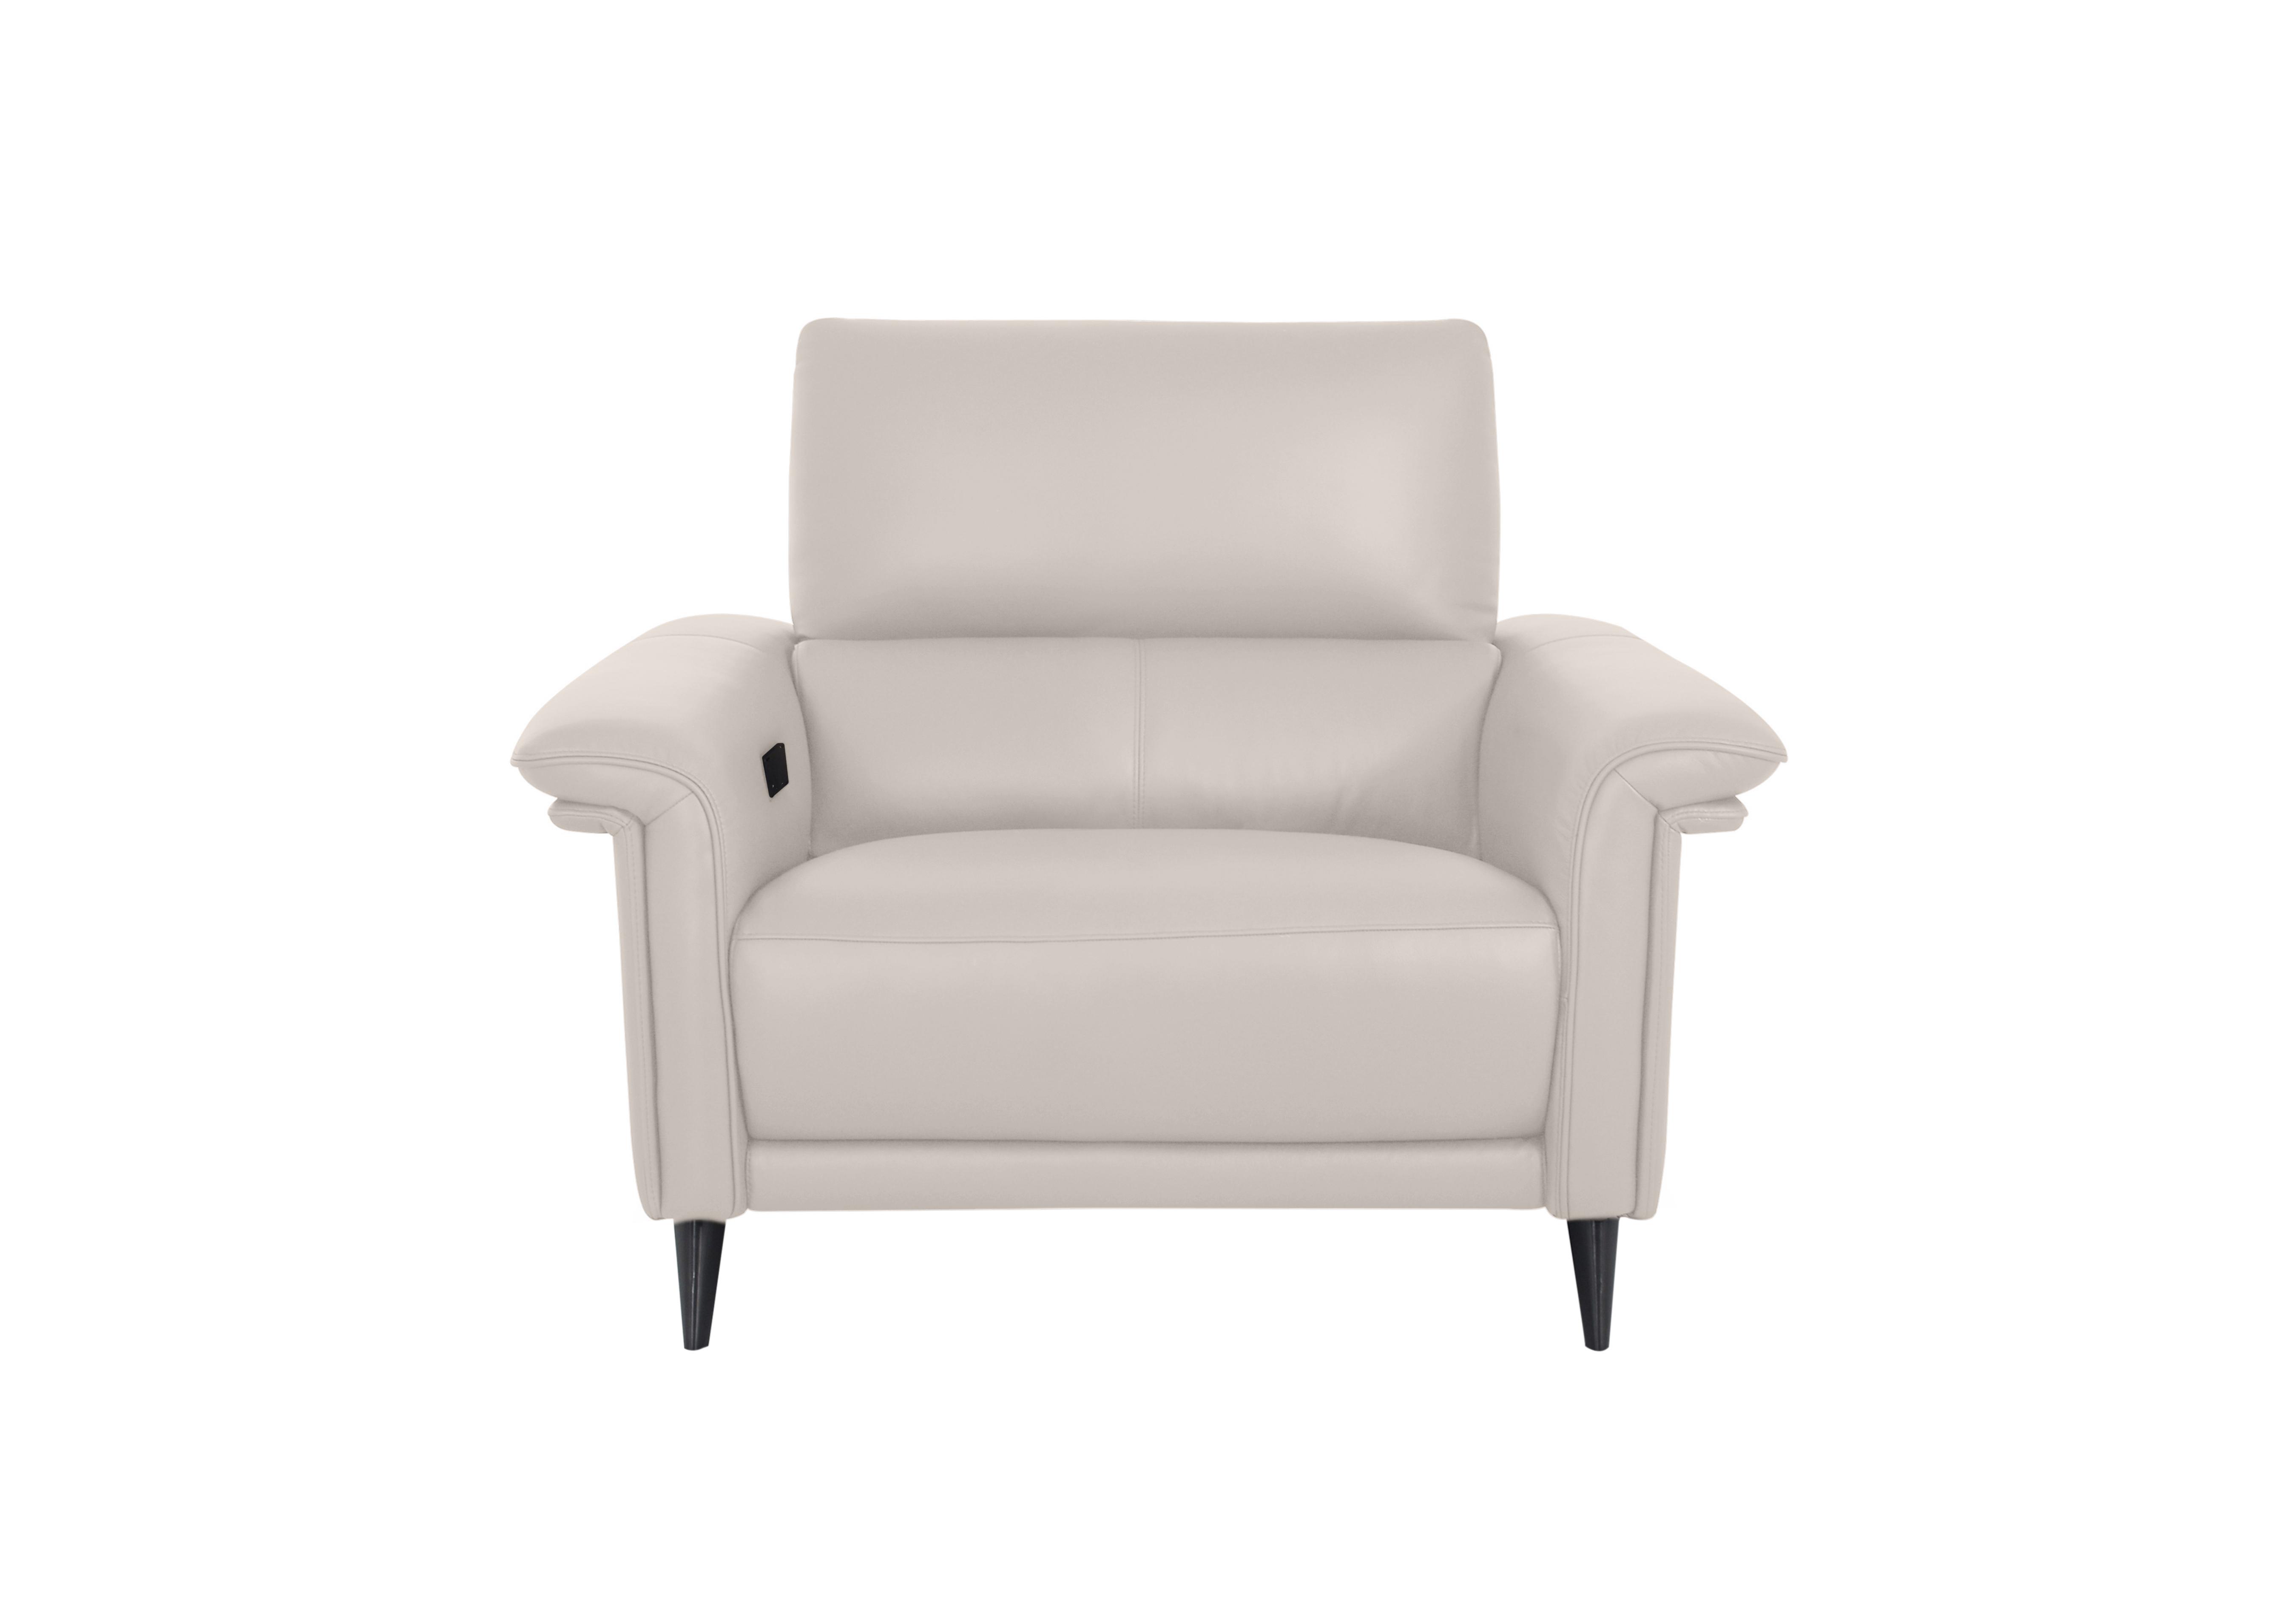 Huxley Leather Chair in Nn-521e Frost on Furniture Village